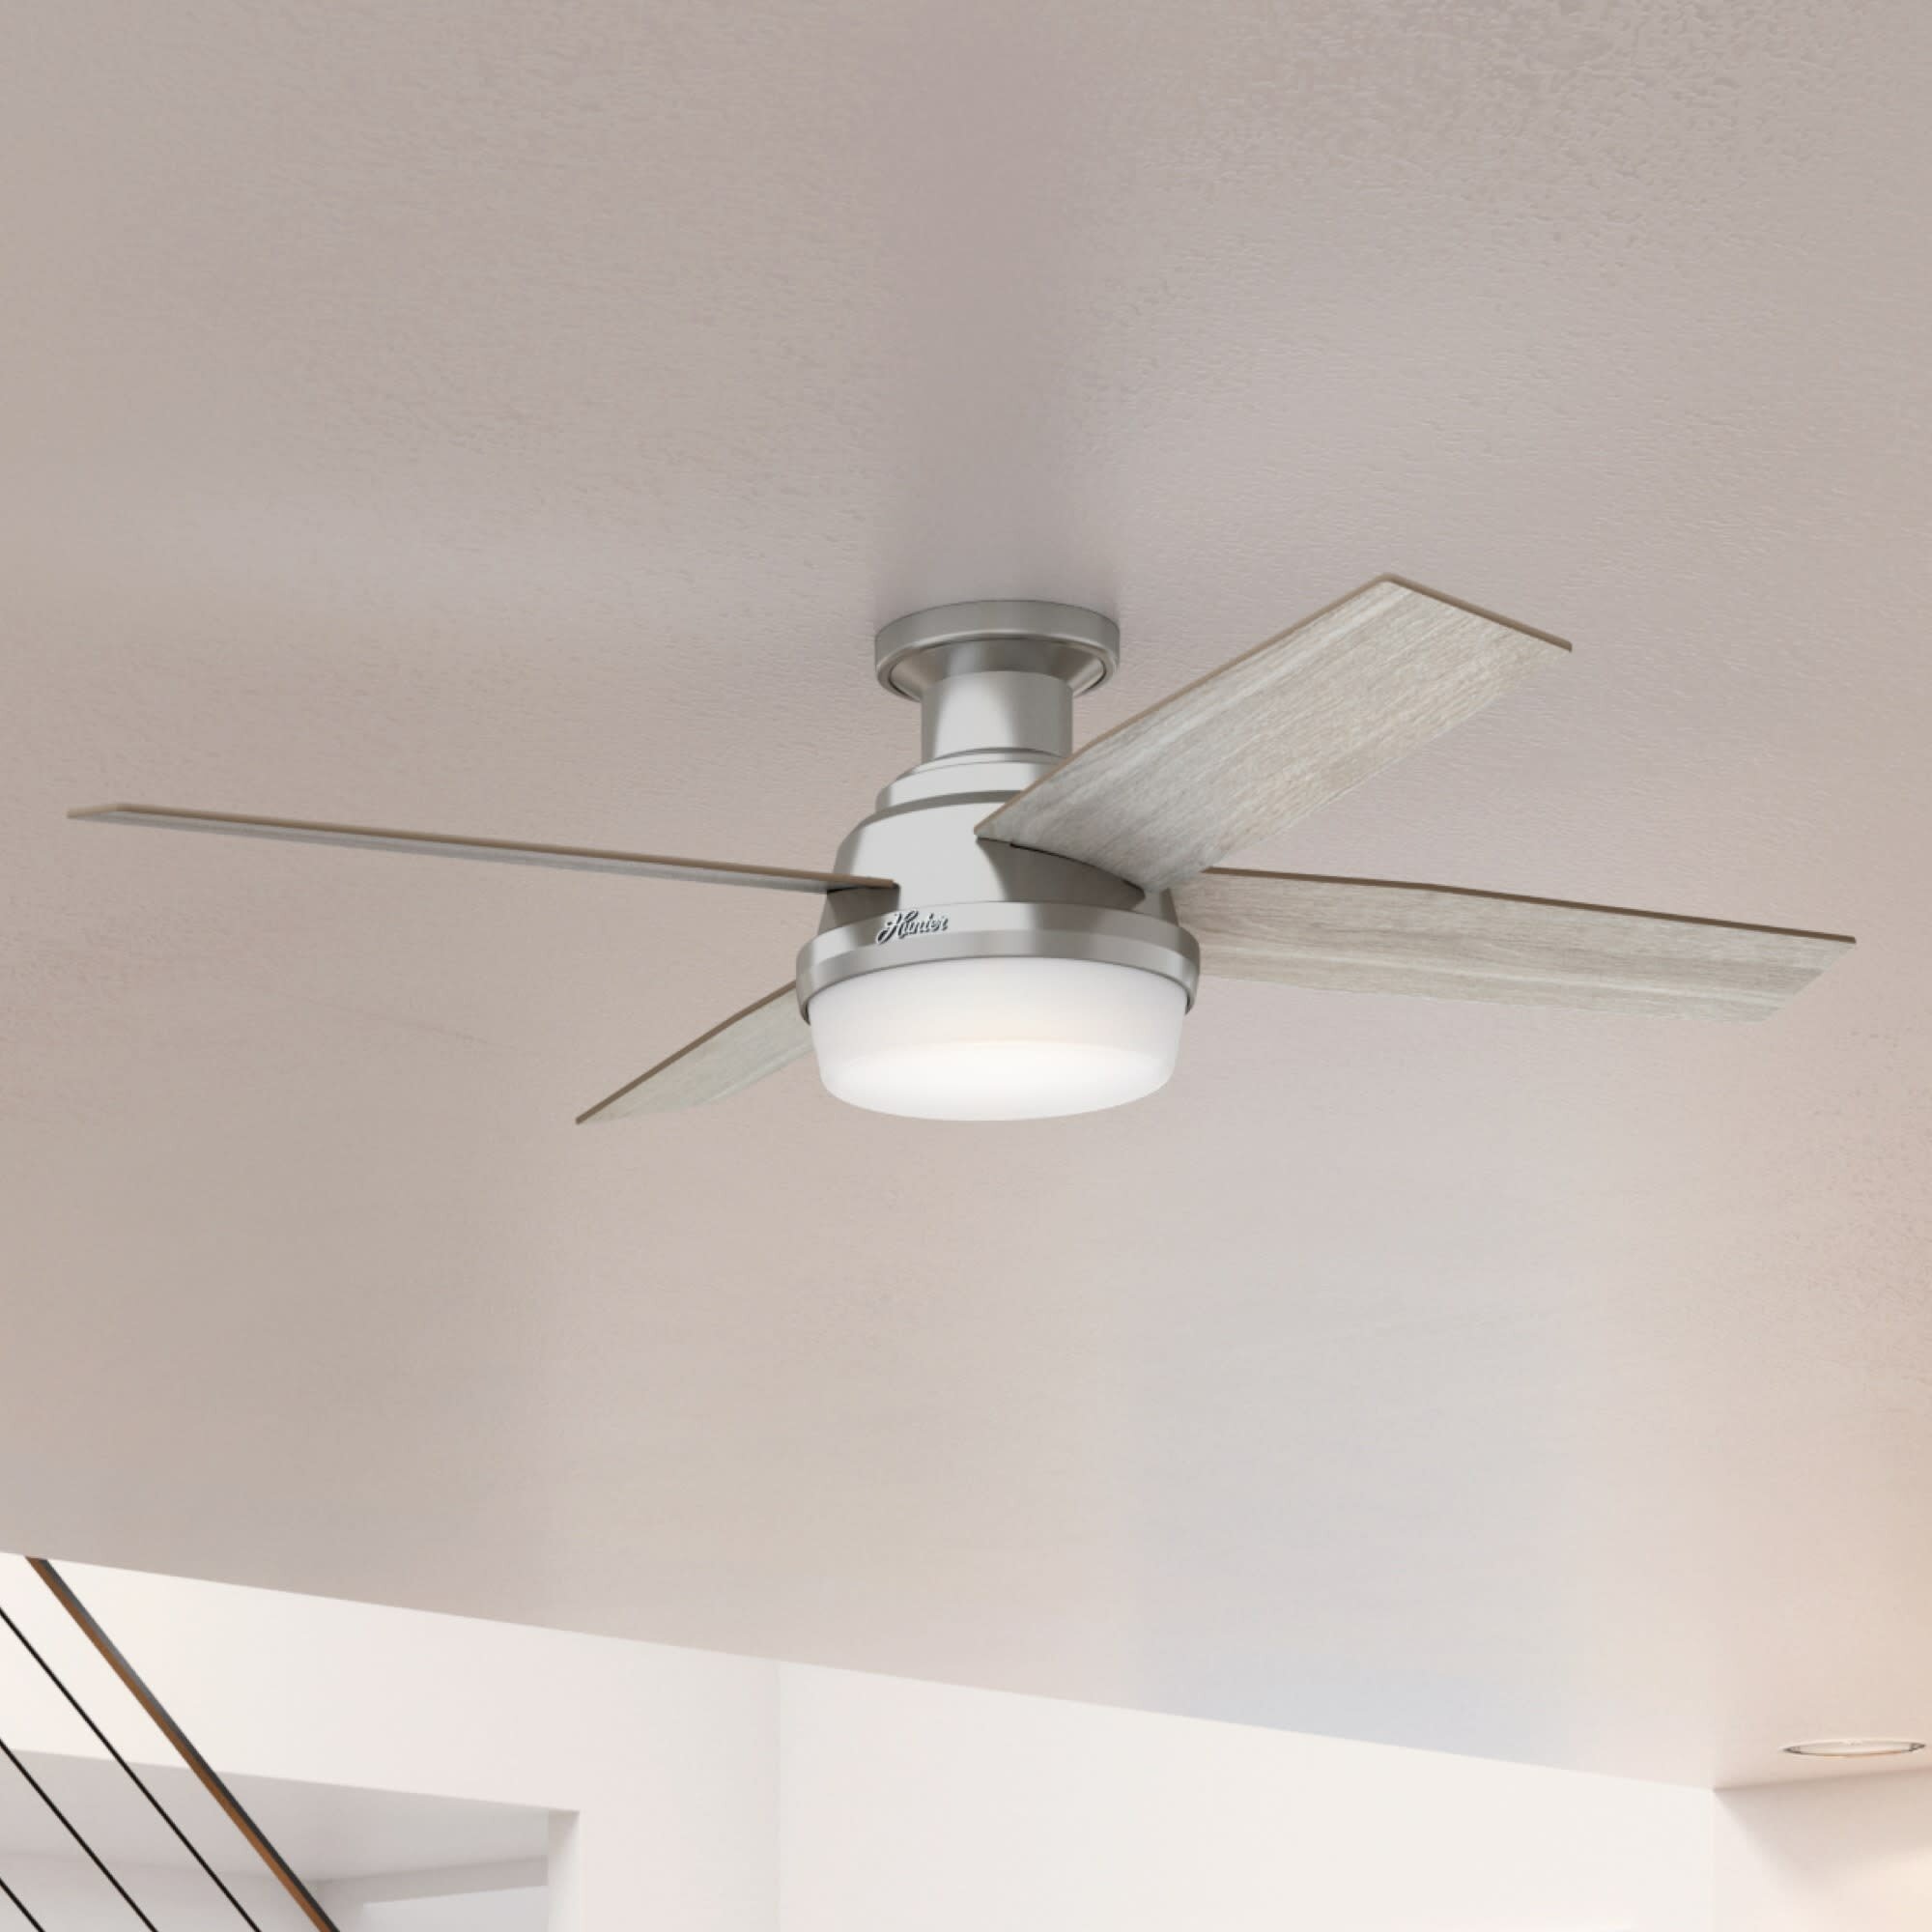 Hunter Fan 52 Dempsey 4 Blade Led Flush Mount Ceiling Fan With Remote Control And Light Kit Included Reviews Wayfair